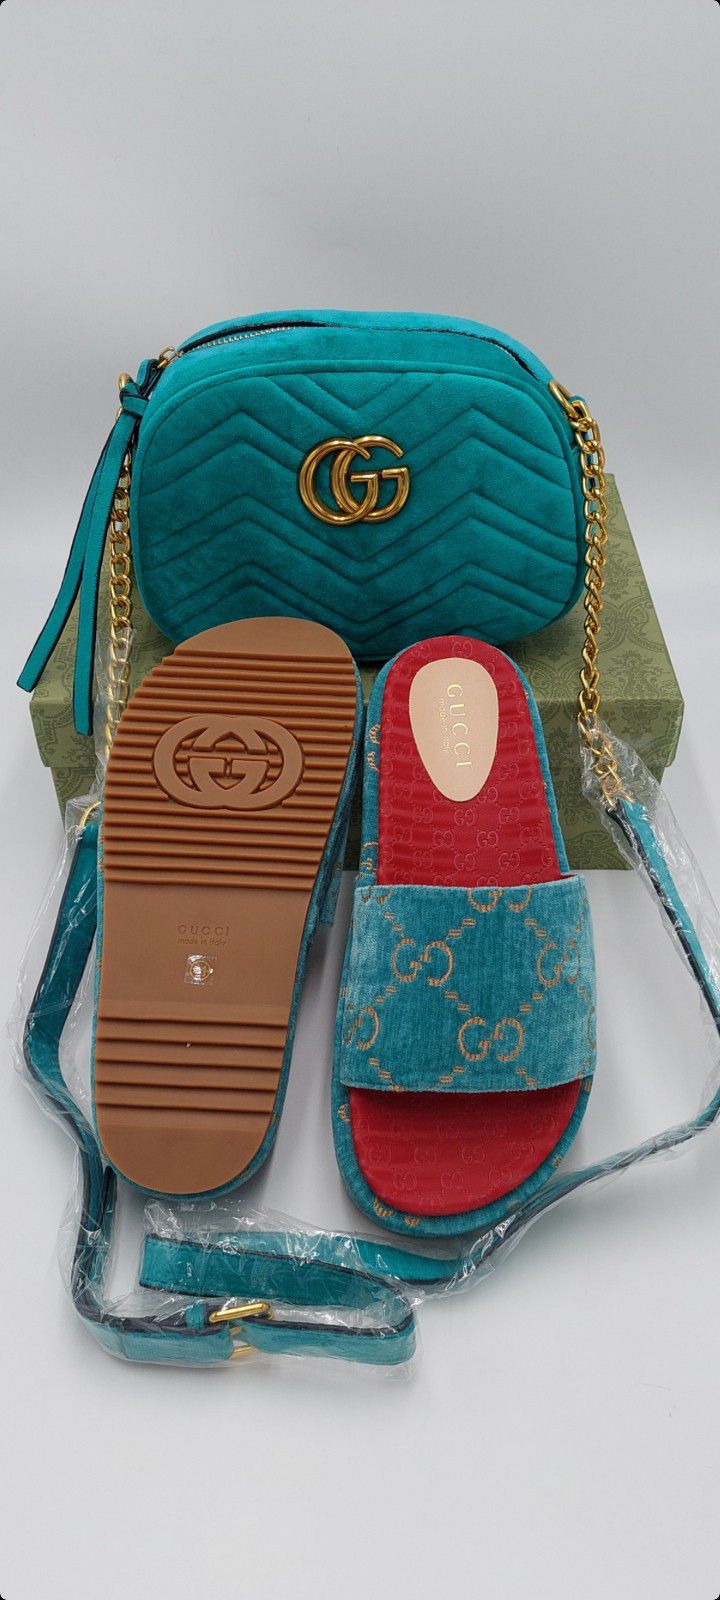 TURQUOISE SLIDES! WITH MATCHING PURSE!